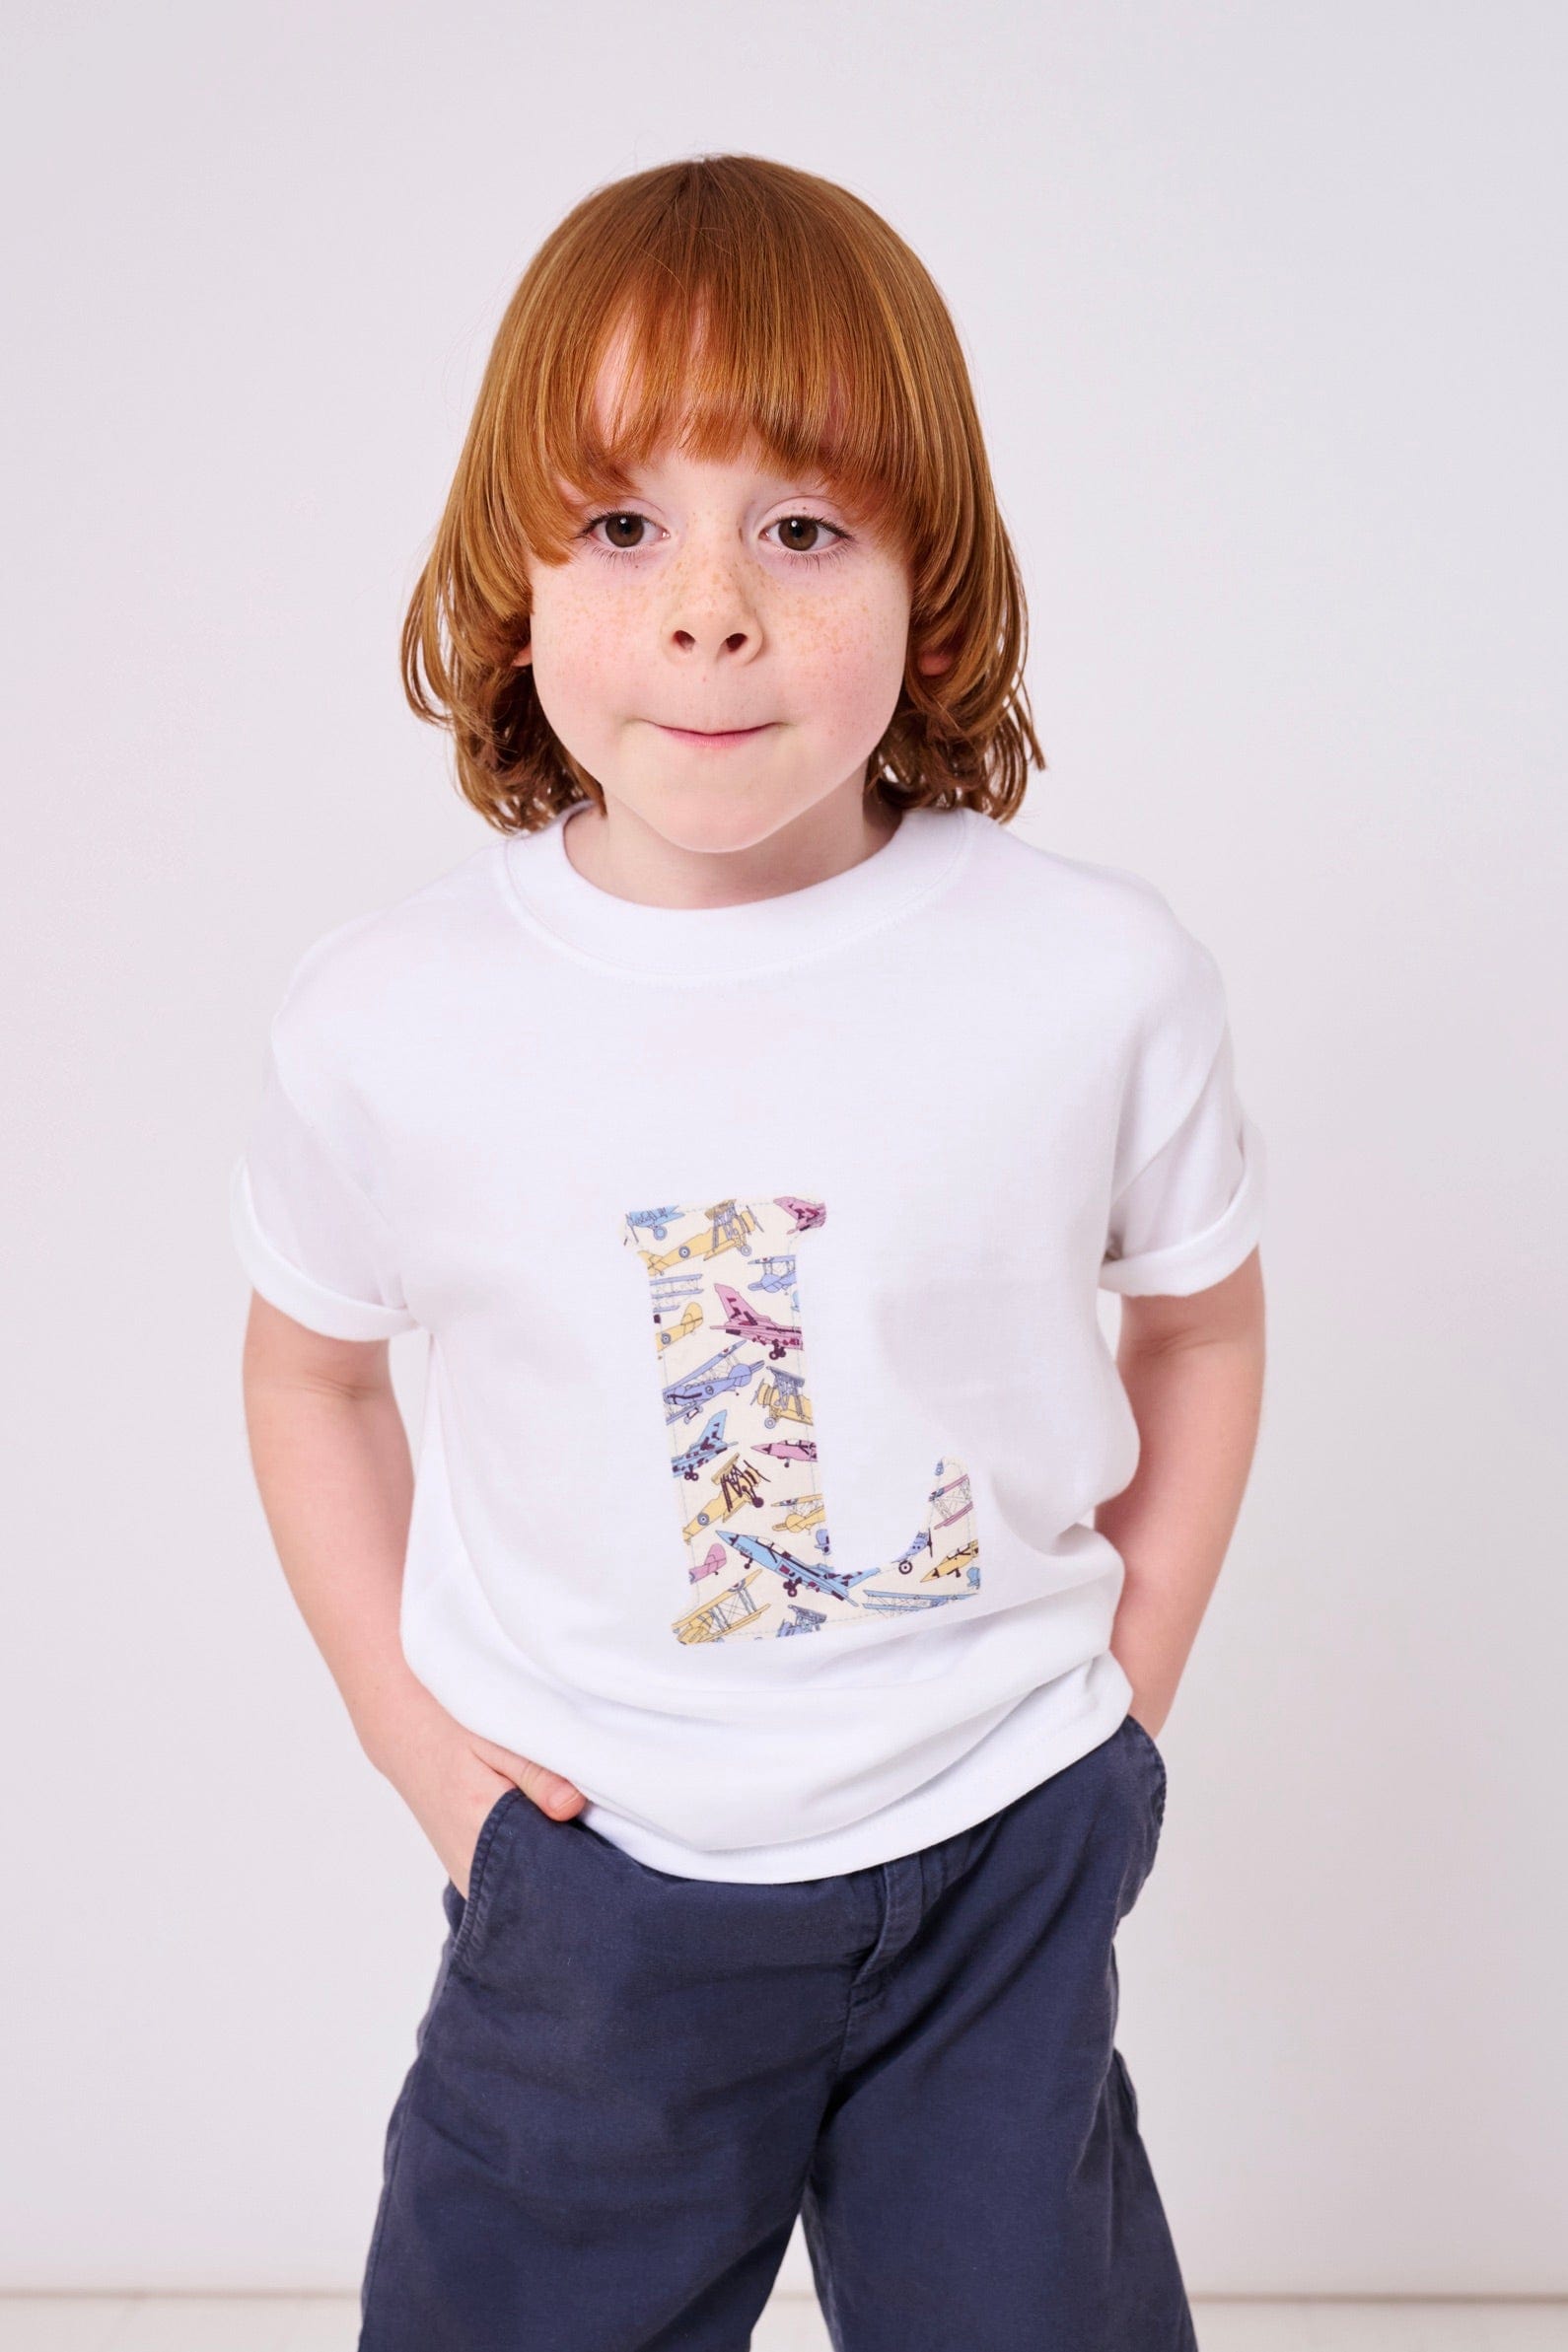 Magnificent Stanley Tee Personalised White T-Shirt in Tom's Jet Liberty Print